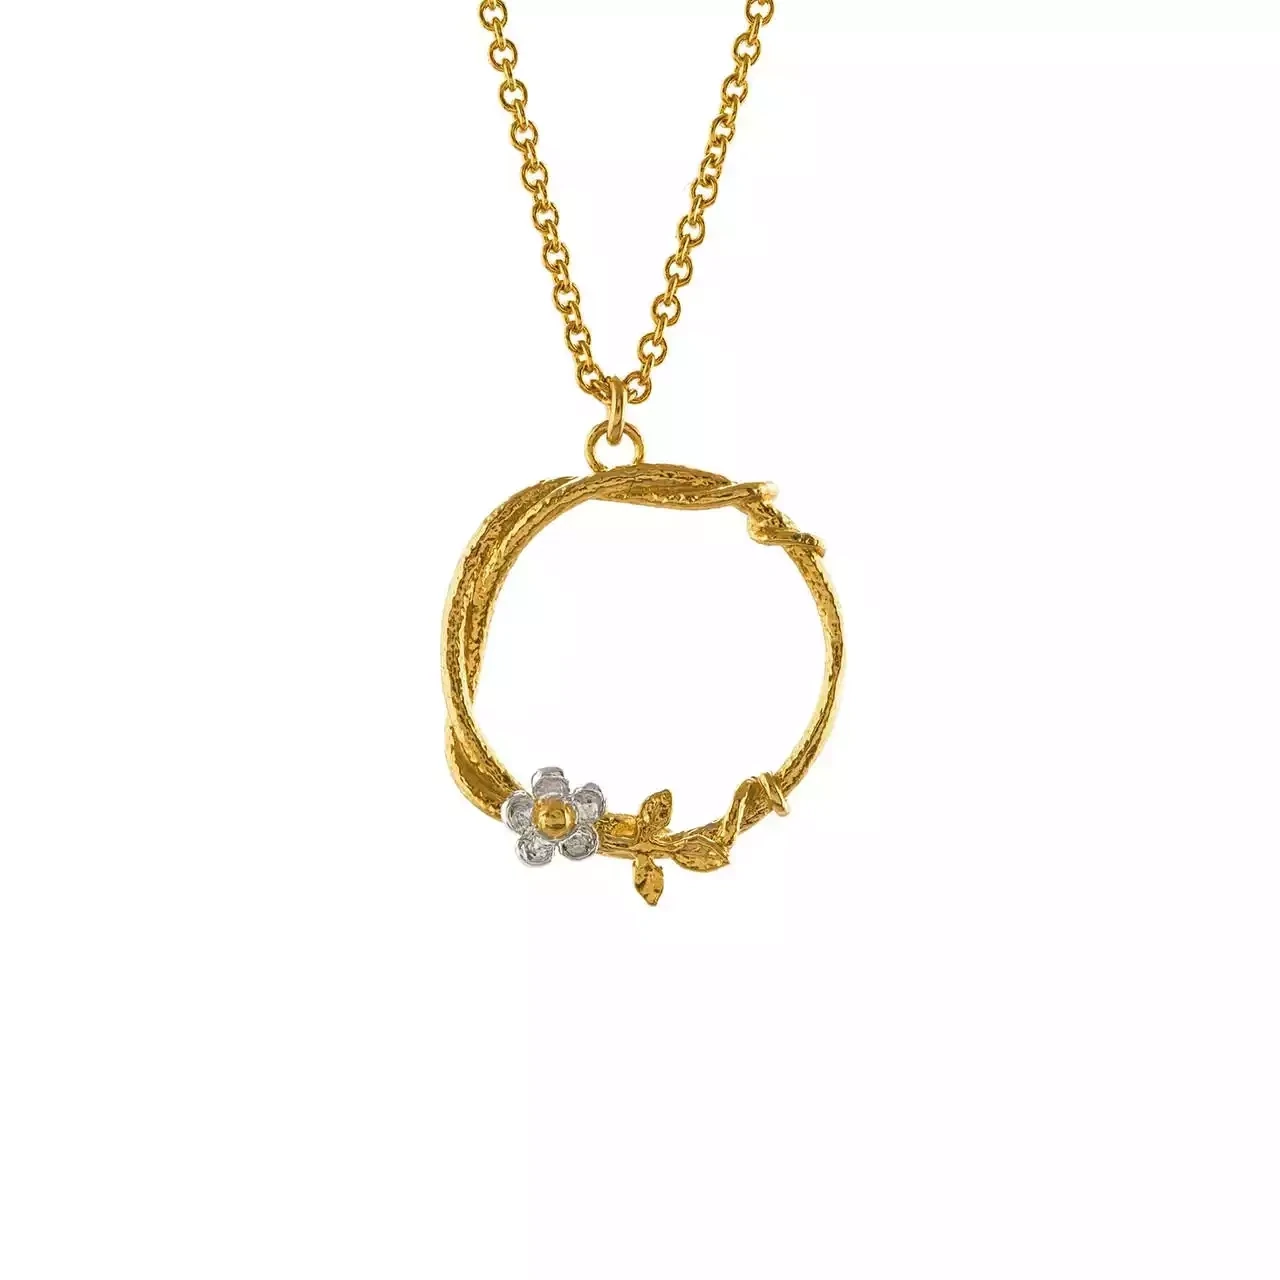 Baby Posy Loop Necklace - Silver and Gold Plate by Alex Monroe